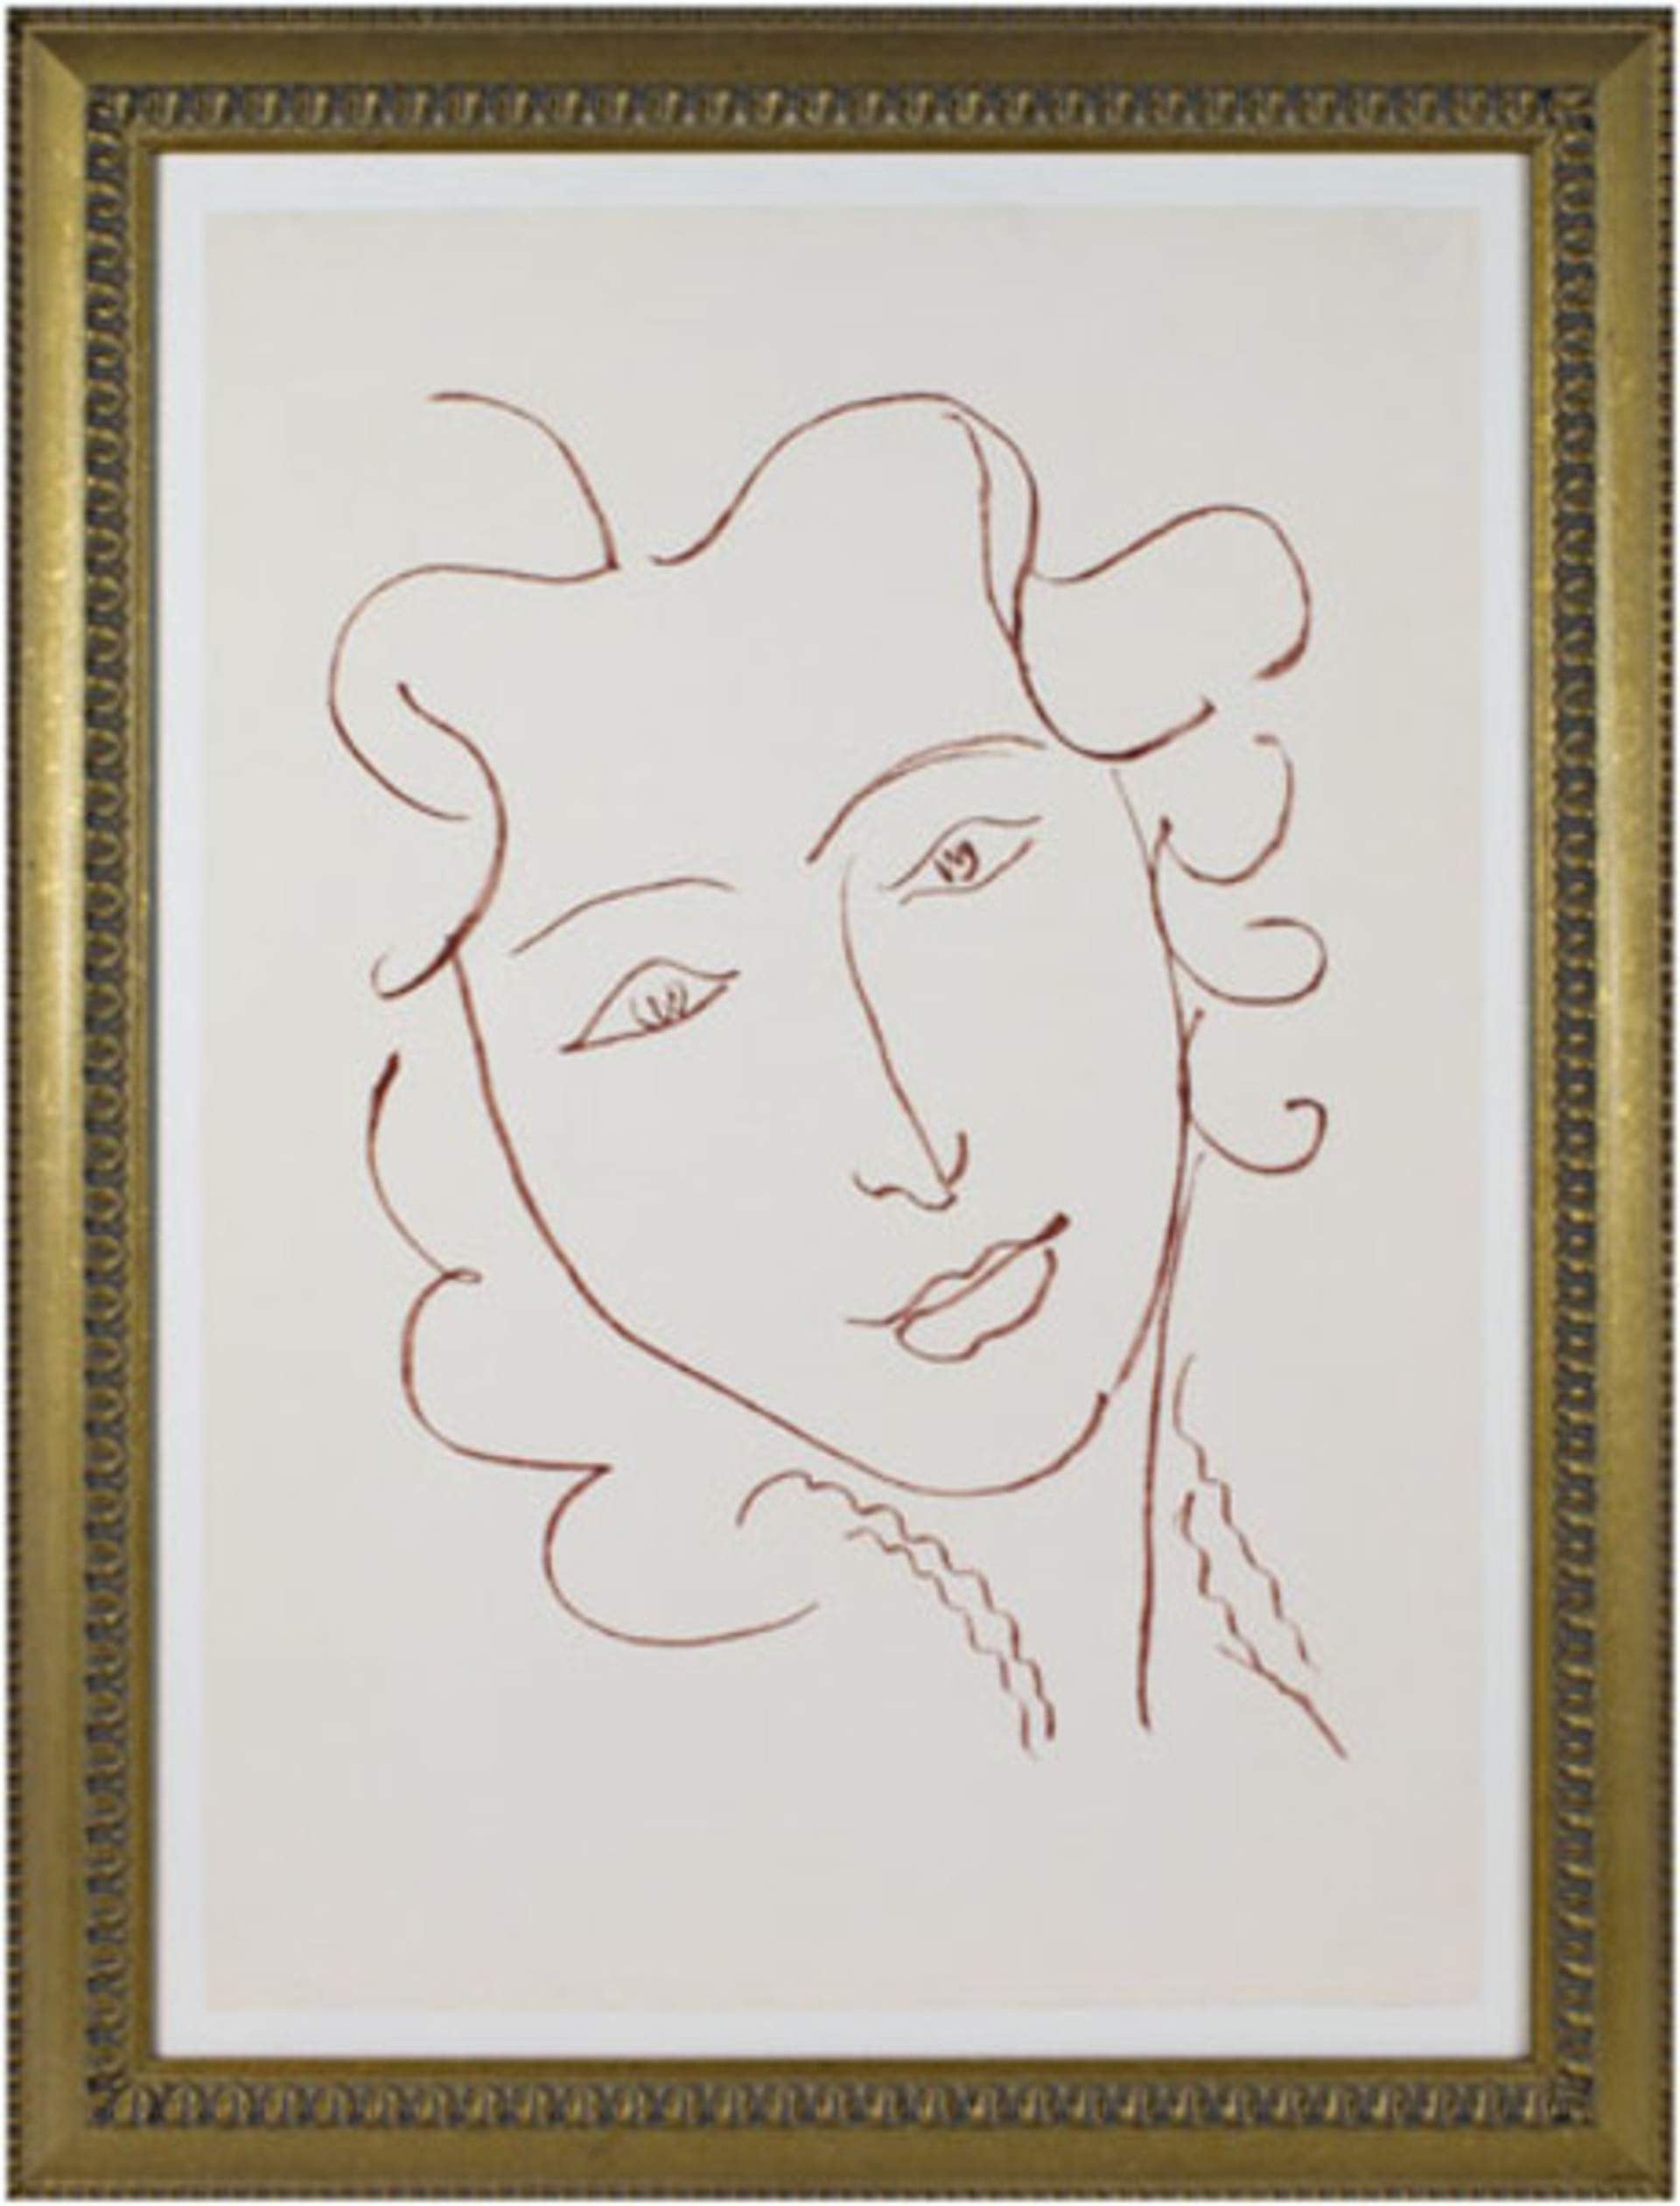 Head of Woman - Relaxed (from Florilege des Amours de Ronsard Portfolio) by Henri Matisse